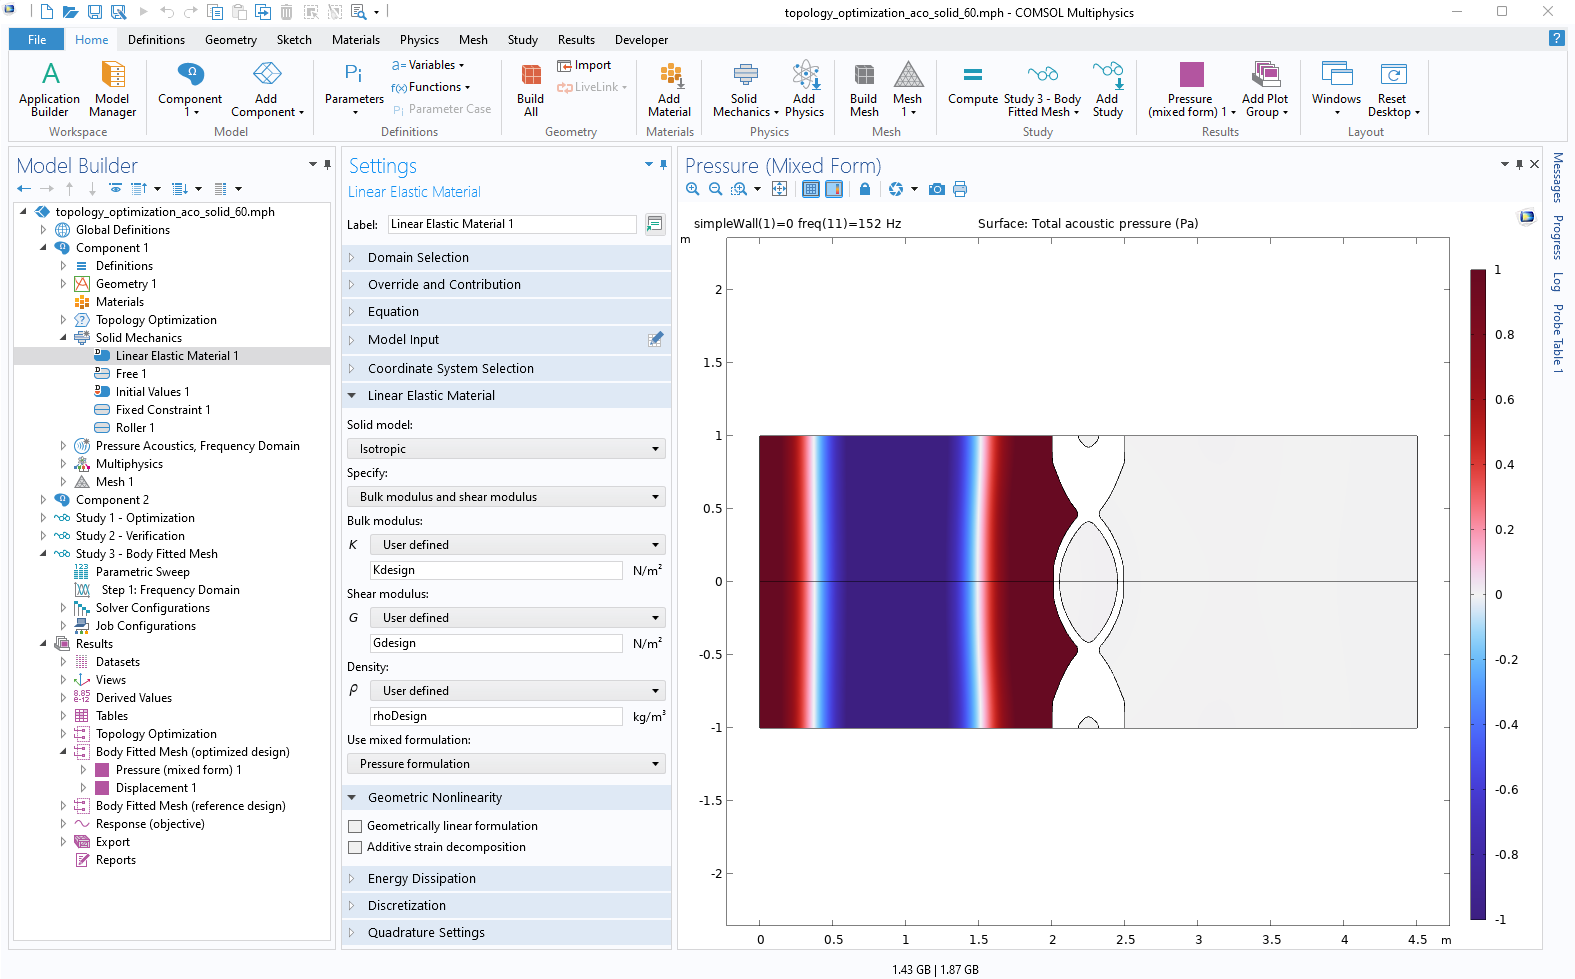 The COMSOL Multiphysics UI showing the Model Builder with the Linear Elastic Material node selected, the corresponding Settings window, and a model that demonstrates topology optimization for a problem involving acoustic-structure interaction in the Graphics window.